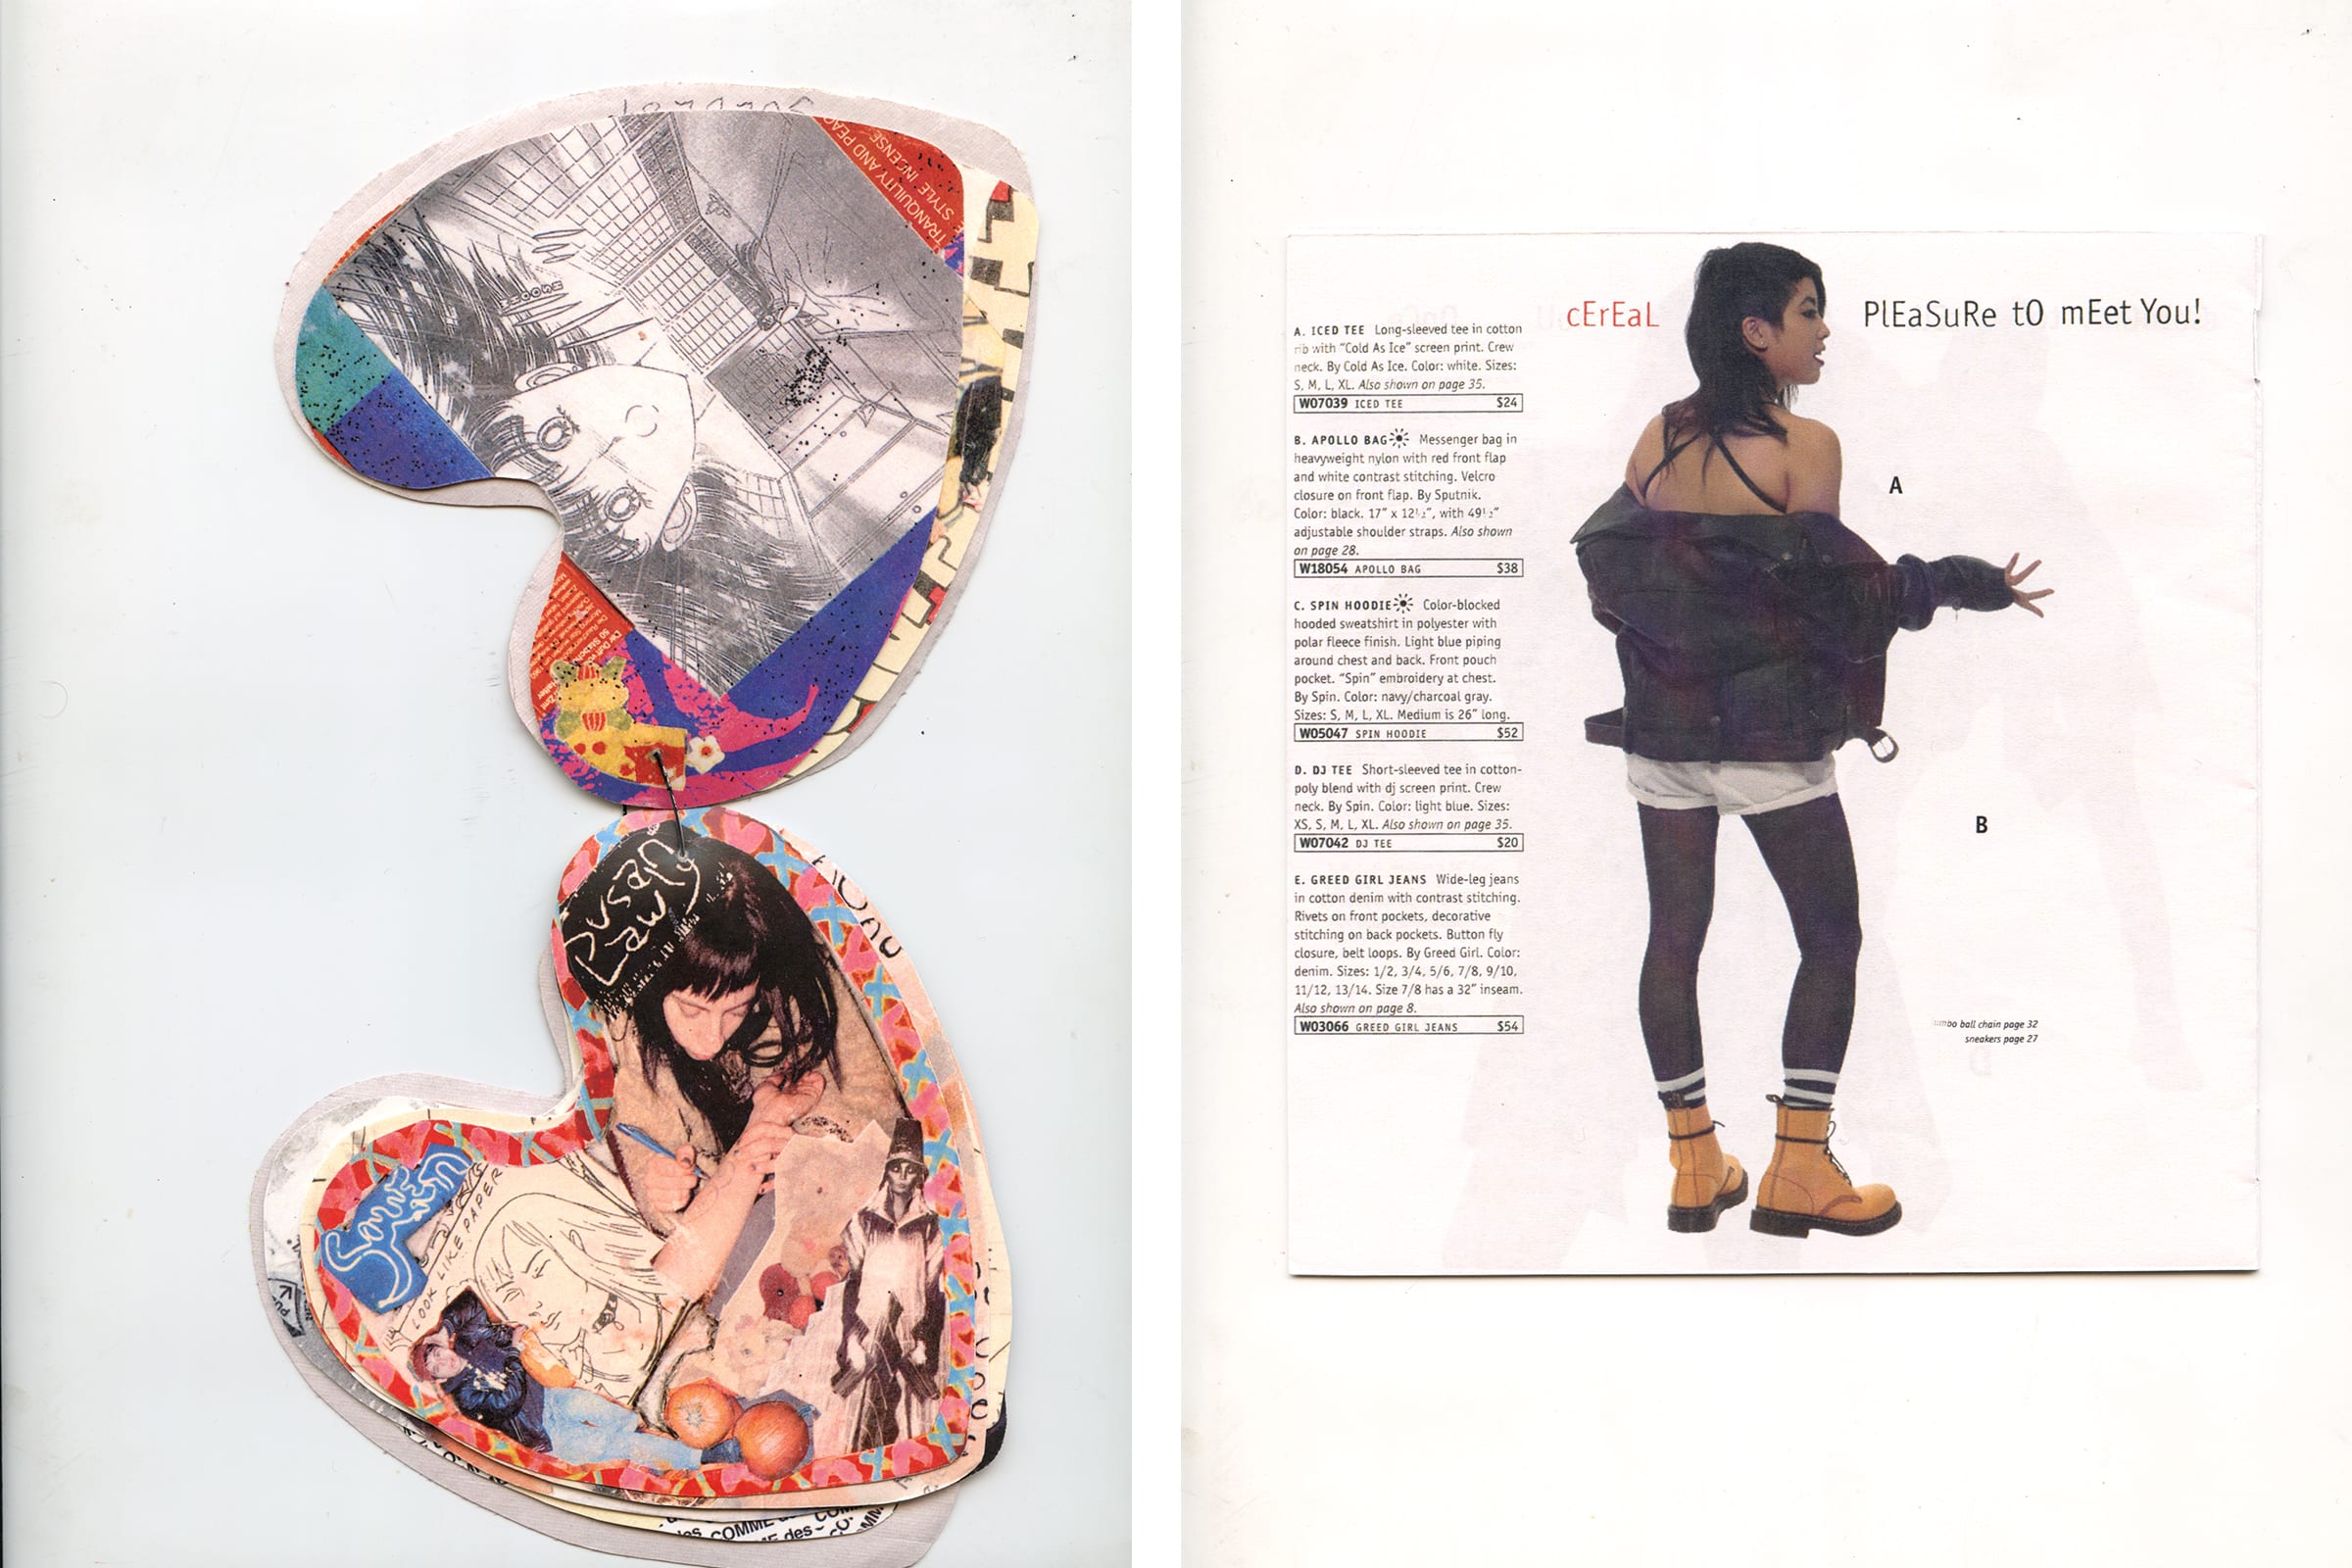 Left: The zine ’Collages from a sketchbook of a Blonde Redhead fan’, 2014. Right: The zine ‘Fall Into It’, 2009. Both zines by Maggie Lee. Courtesy of the artist and Édouard Montassut.